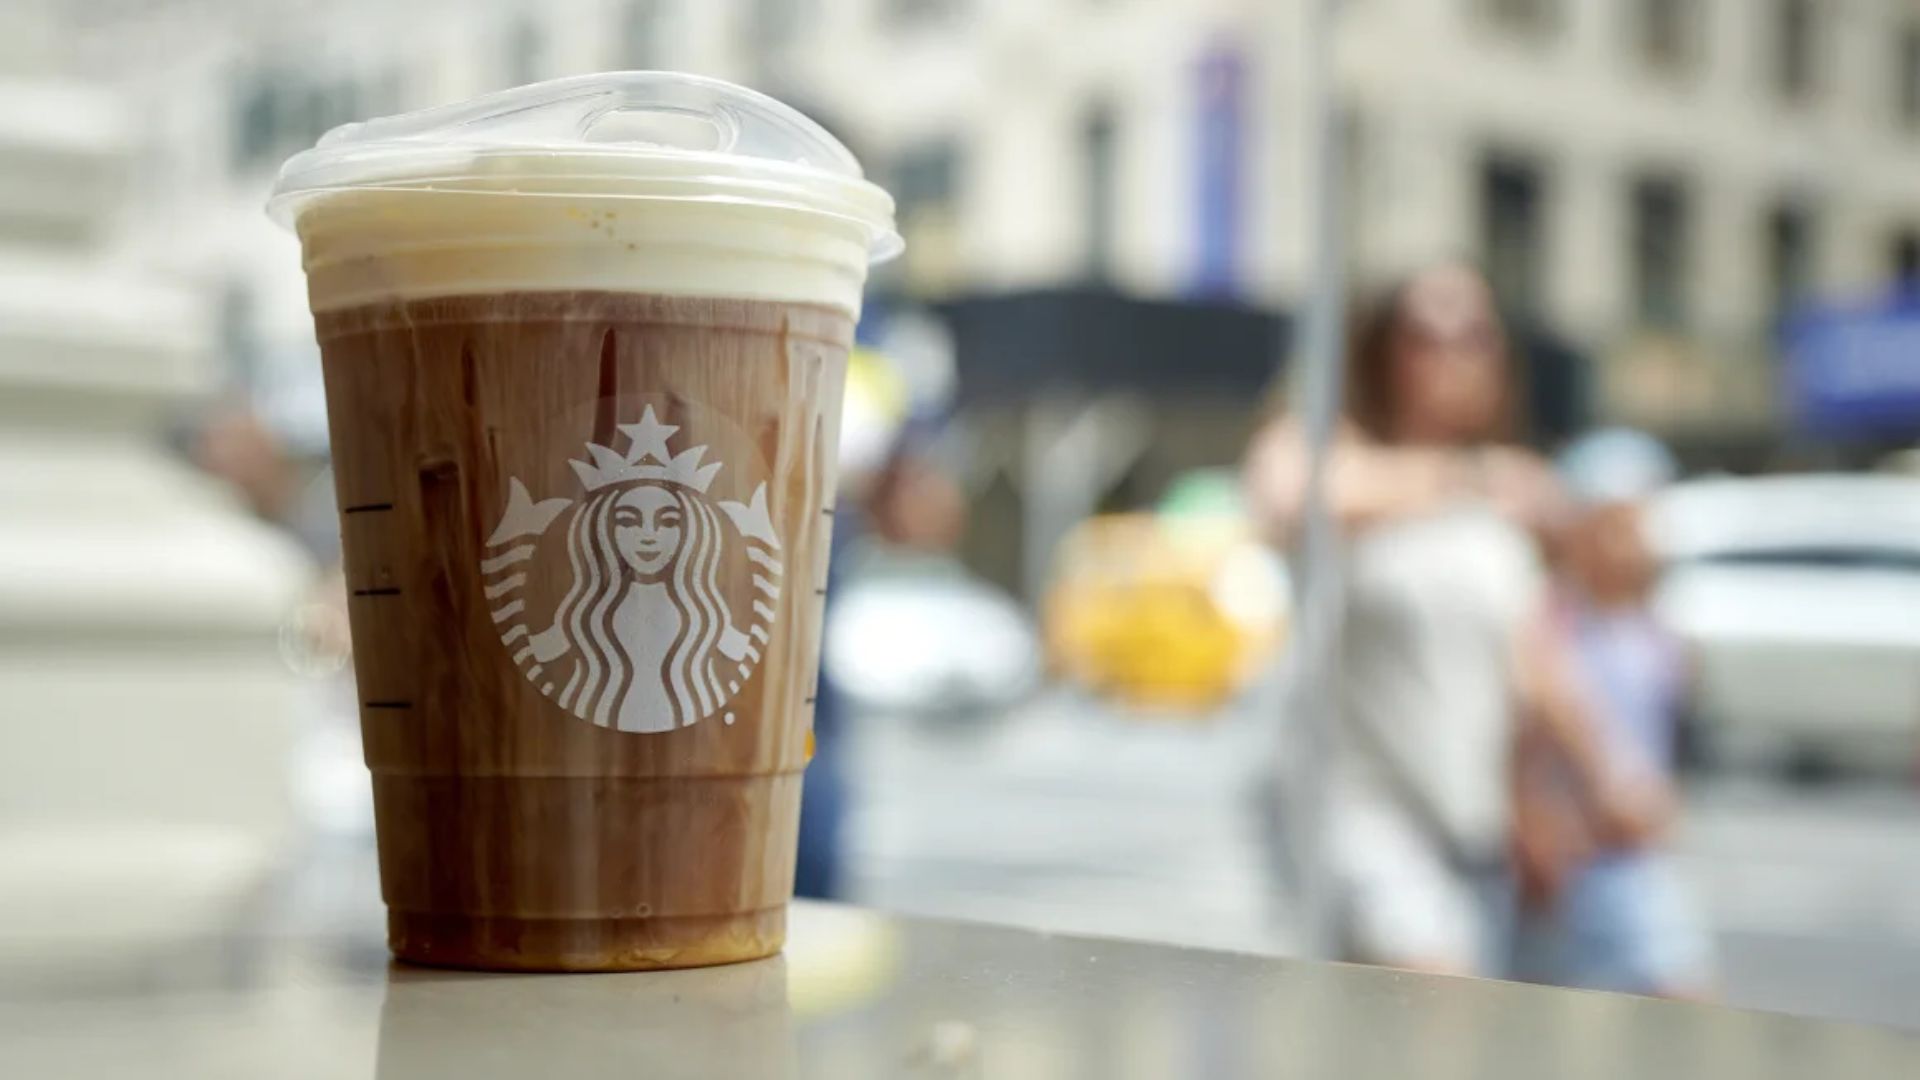 Starbucks joins the value menu wars with a new discounted offer